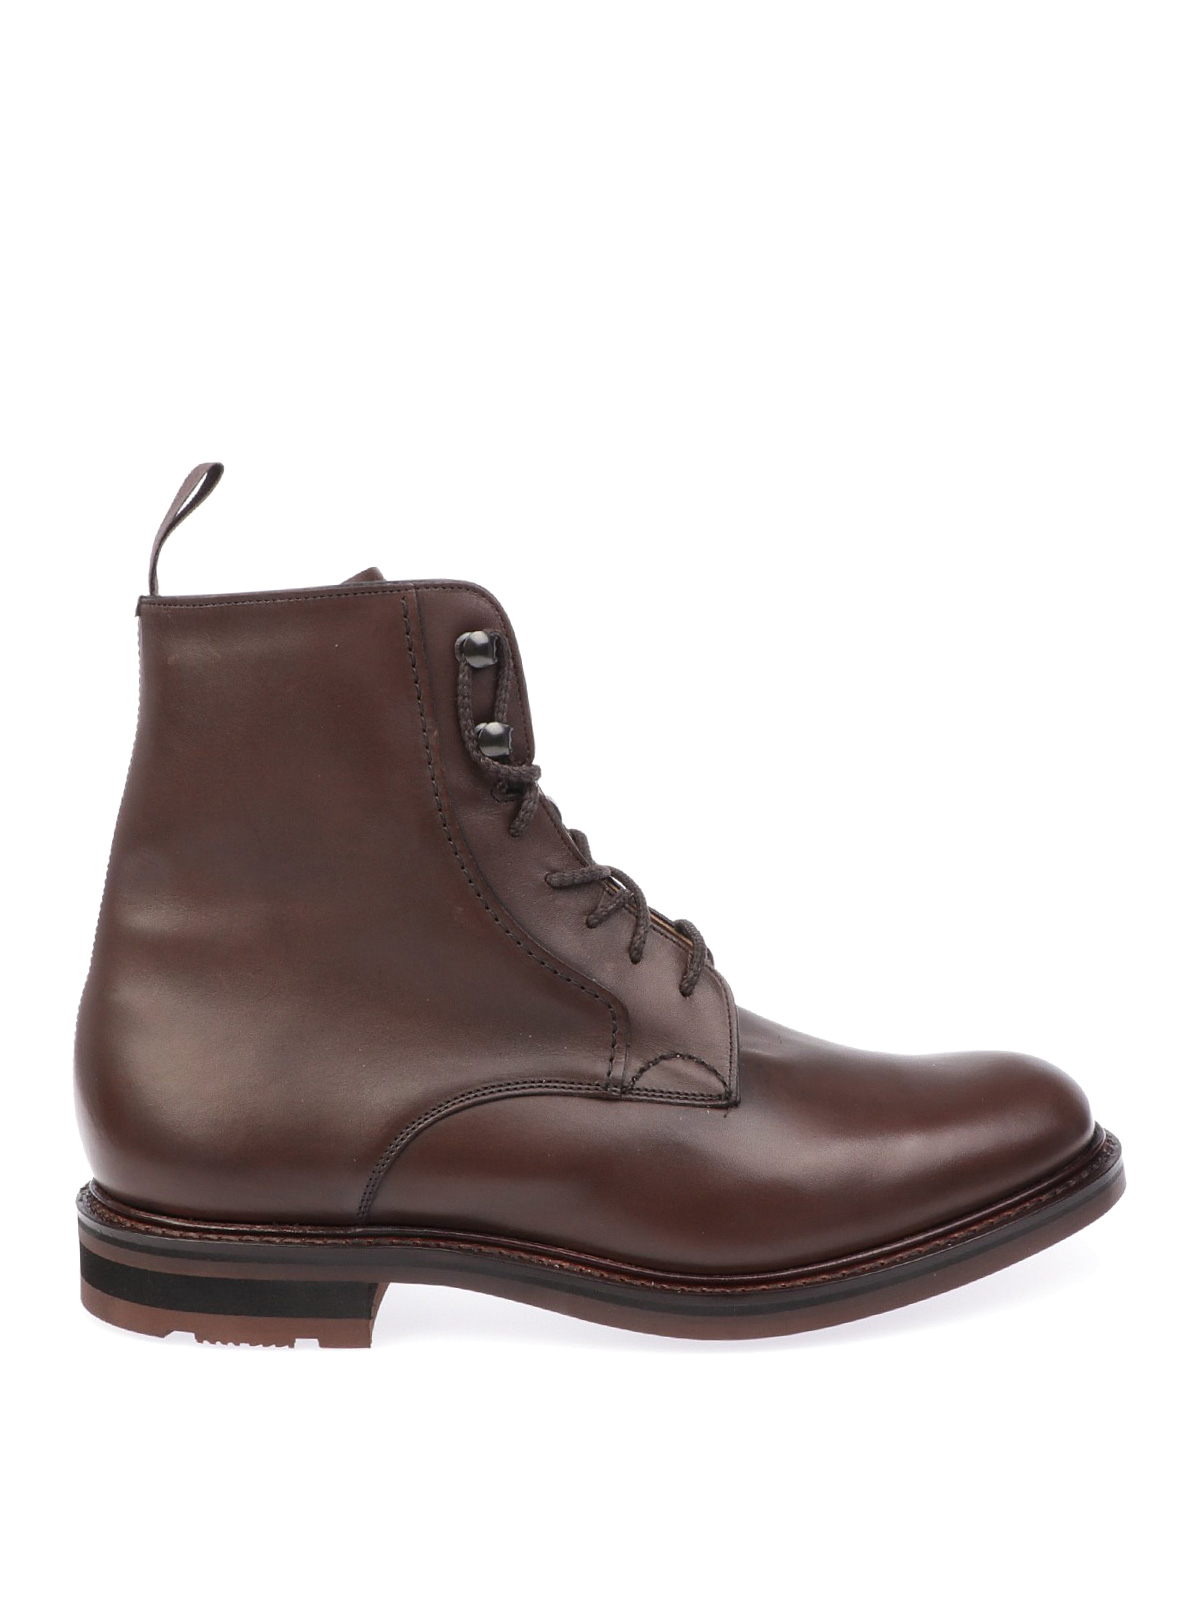 CHURCH'S WOOTTON LEATHER BOOTIES